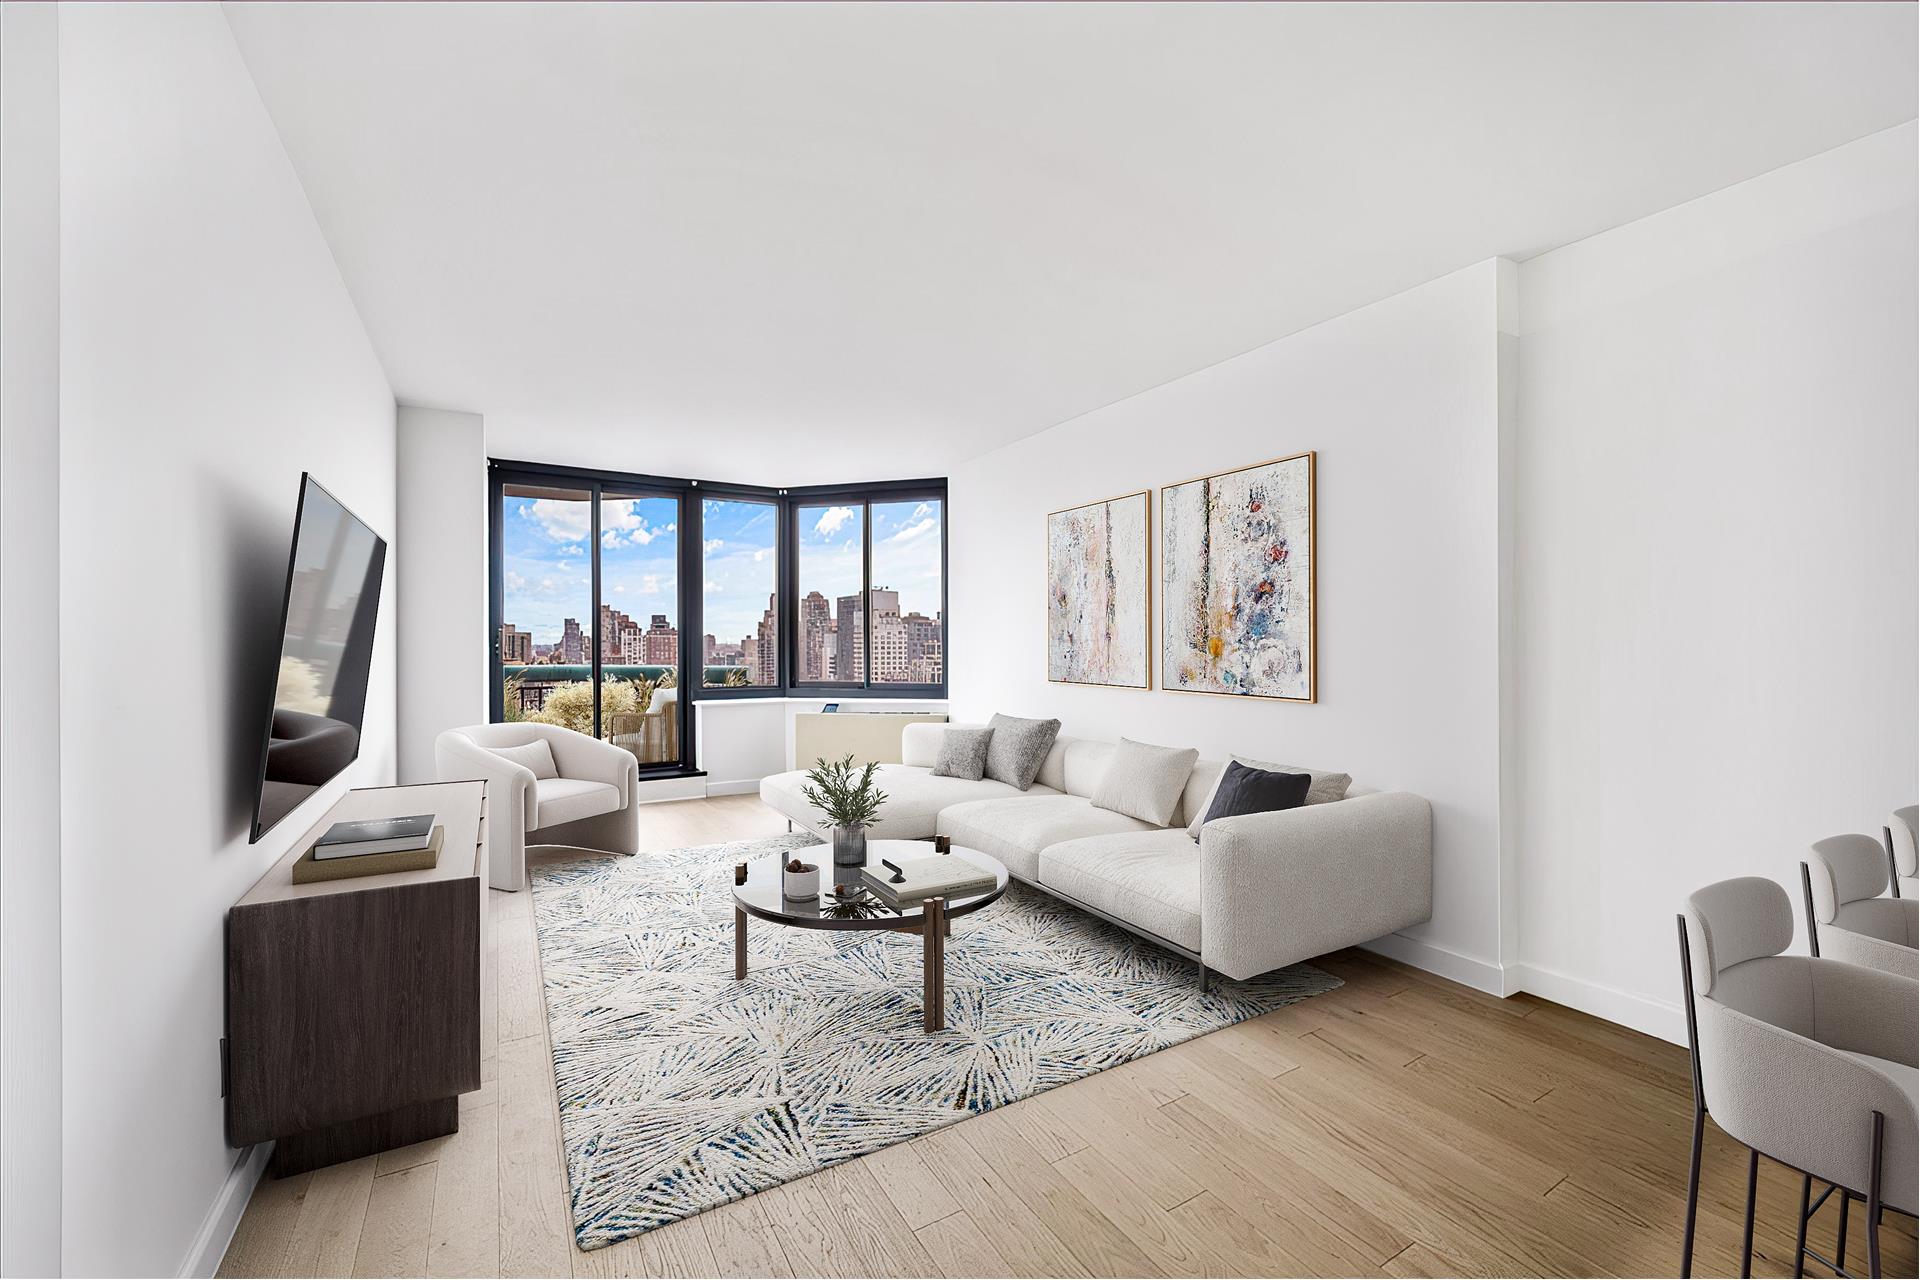 303 East 60th Street 27F, Lenox Hill, Upper East Side, NYC - 1 Bedrooms  
1 Bathrooms  
3 Rooms - 